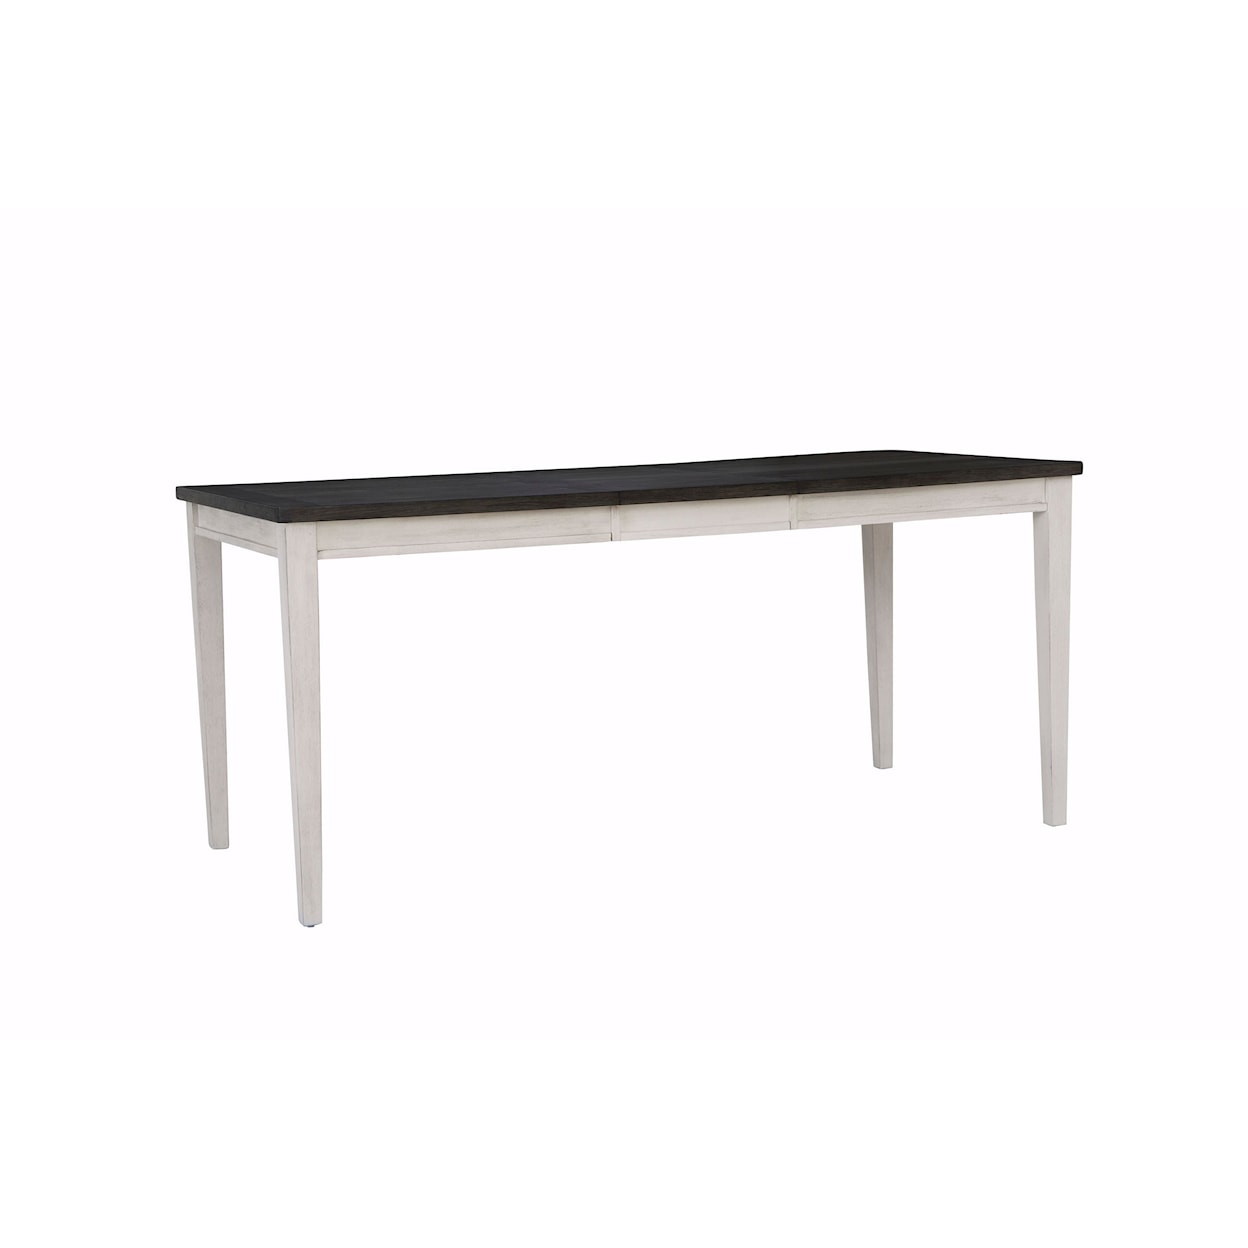 Aspenhome Caraway Counter Height Dining Table